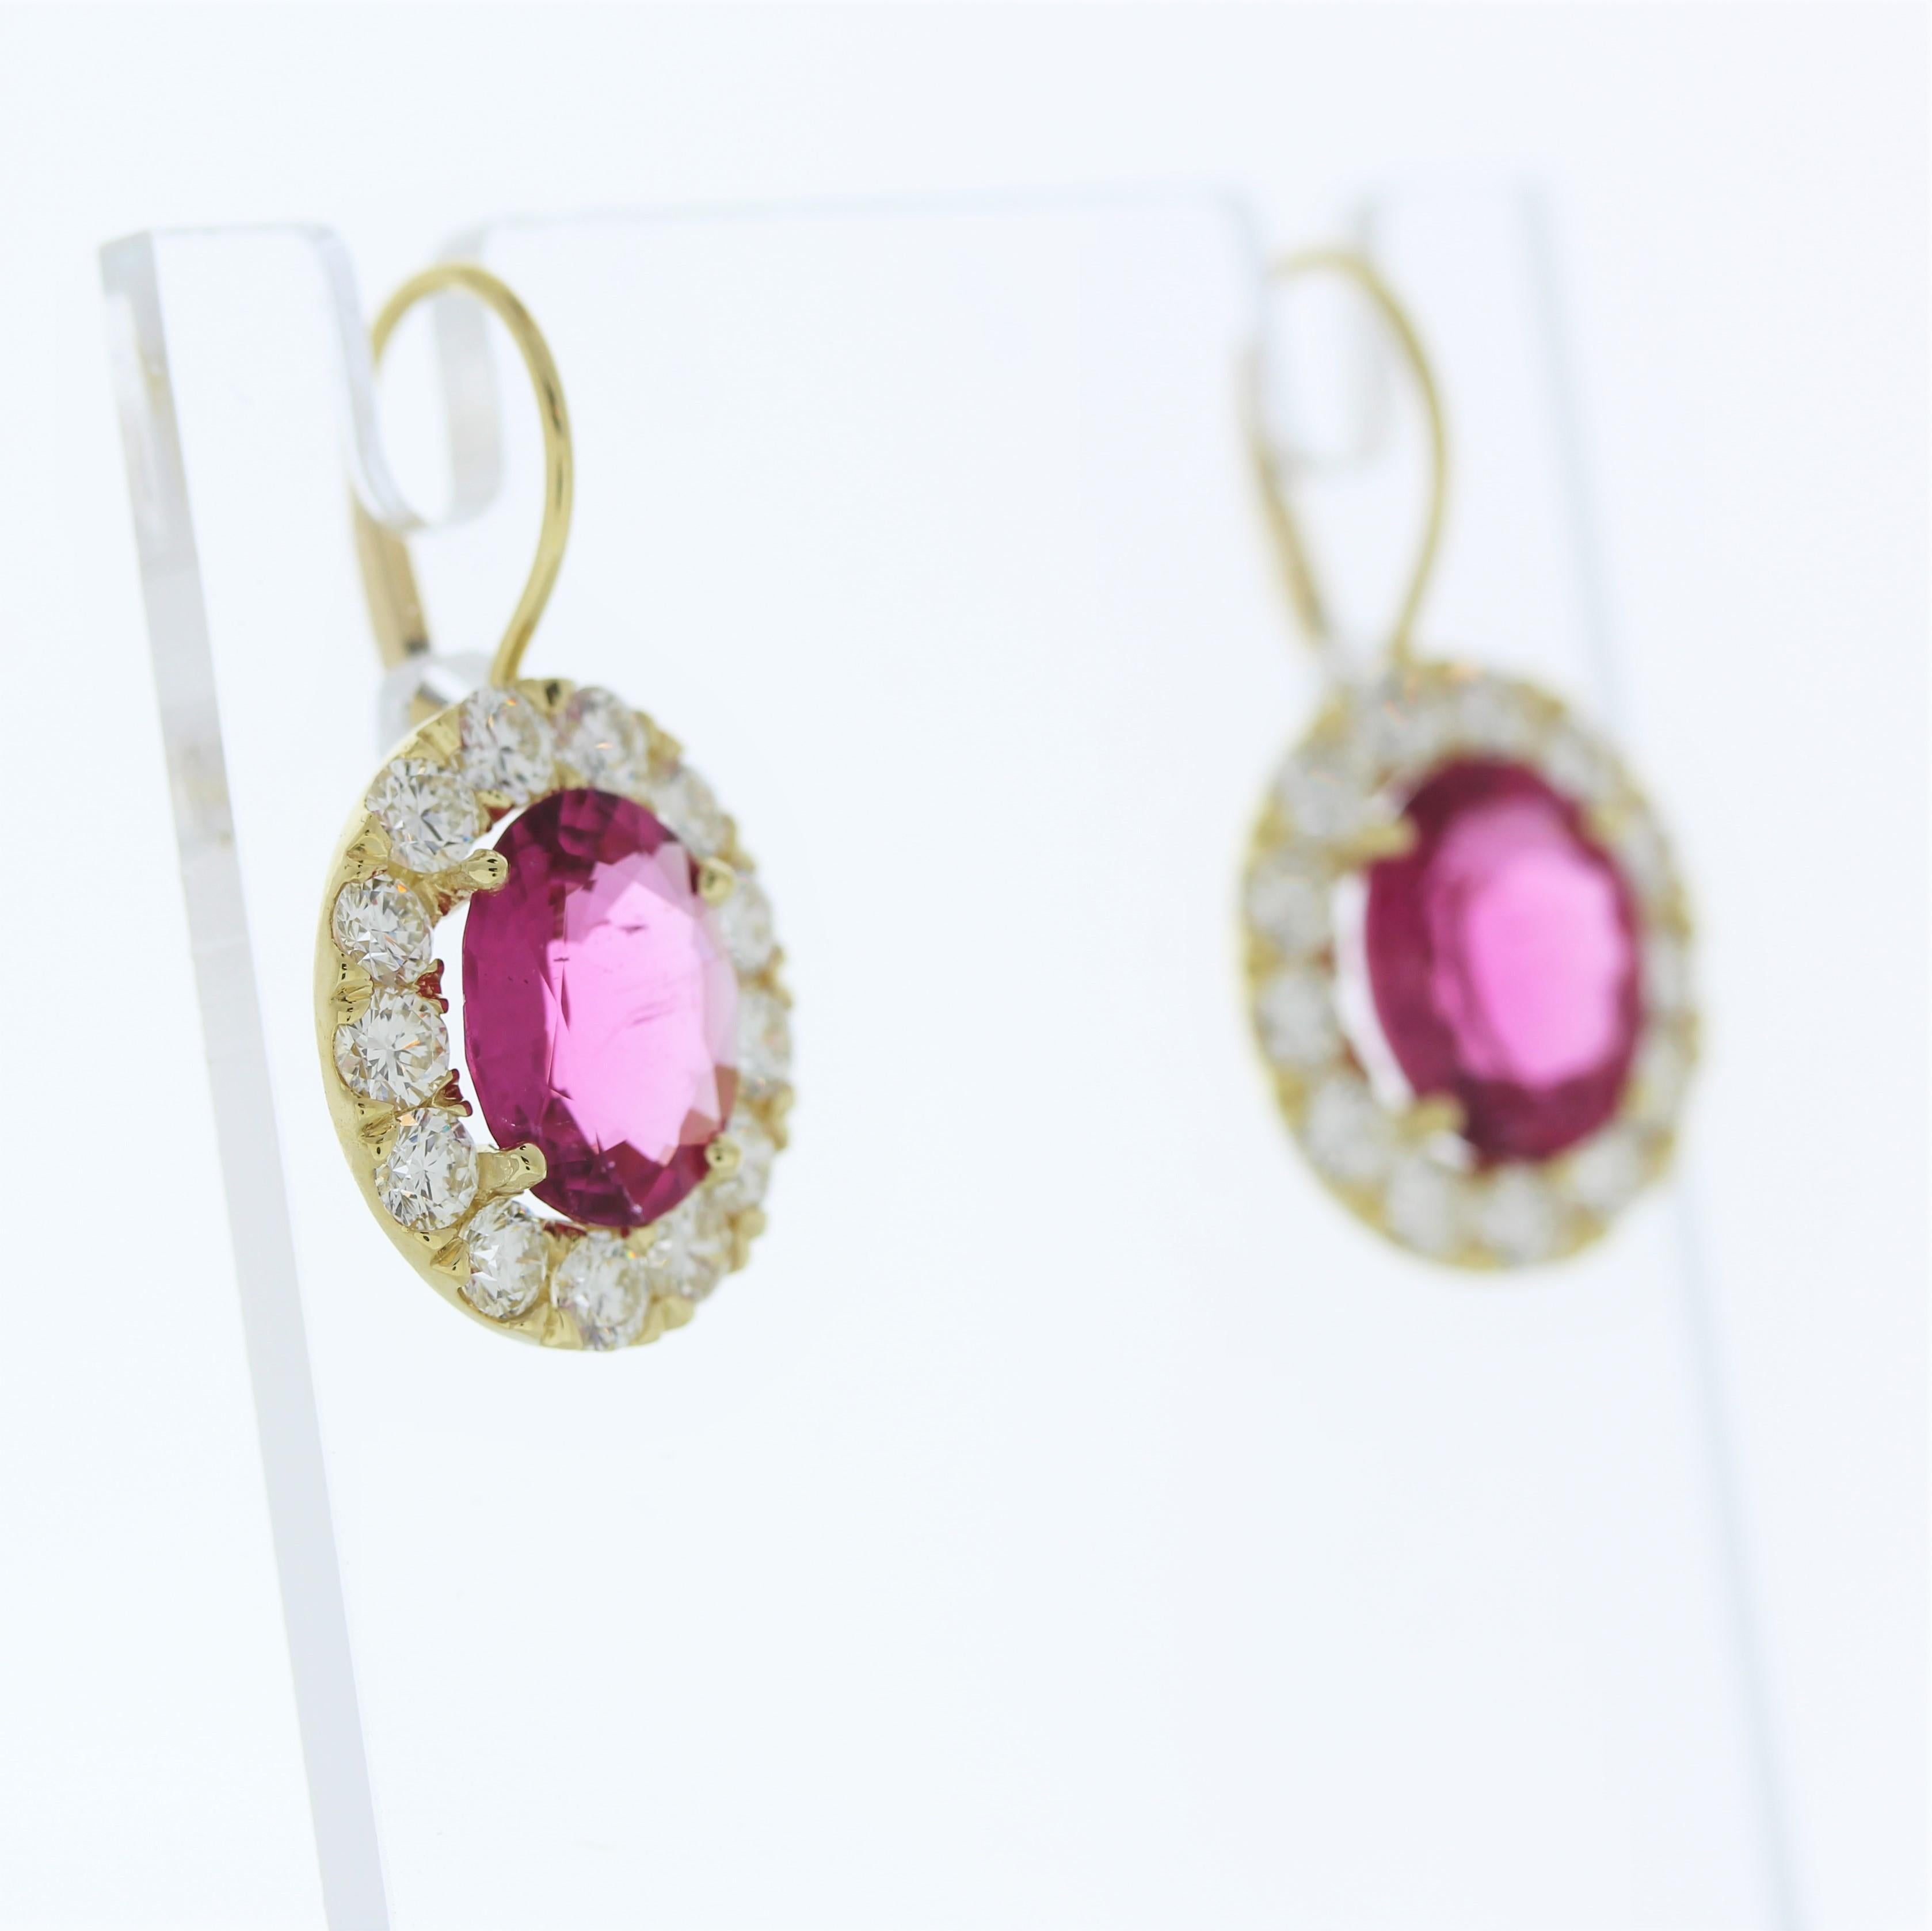 The fashion earrings feature two rubelite gemstones, each weighing 5.72 carats, set in 18 karat yellow gold. They are accented by a total of 26 round-cut diamonds with a combined weight of 2.9 carats in each earring. These earrings are likely to